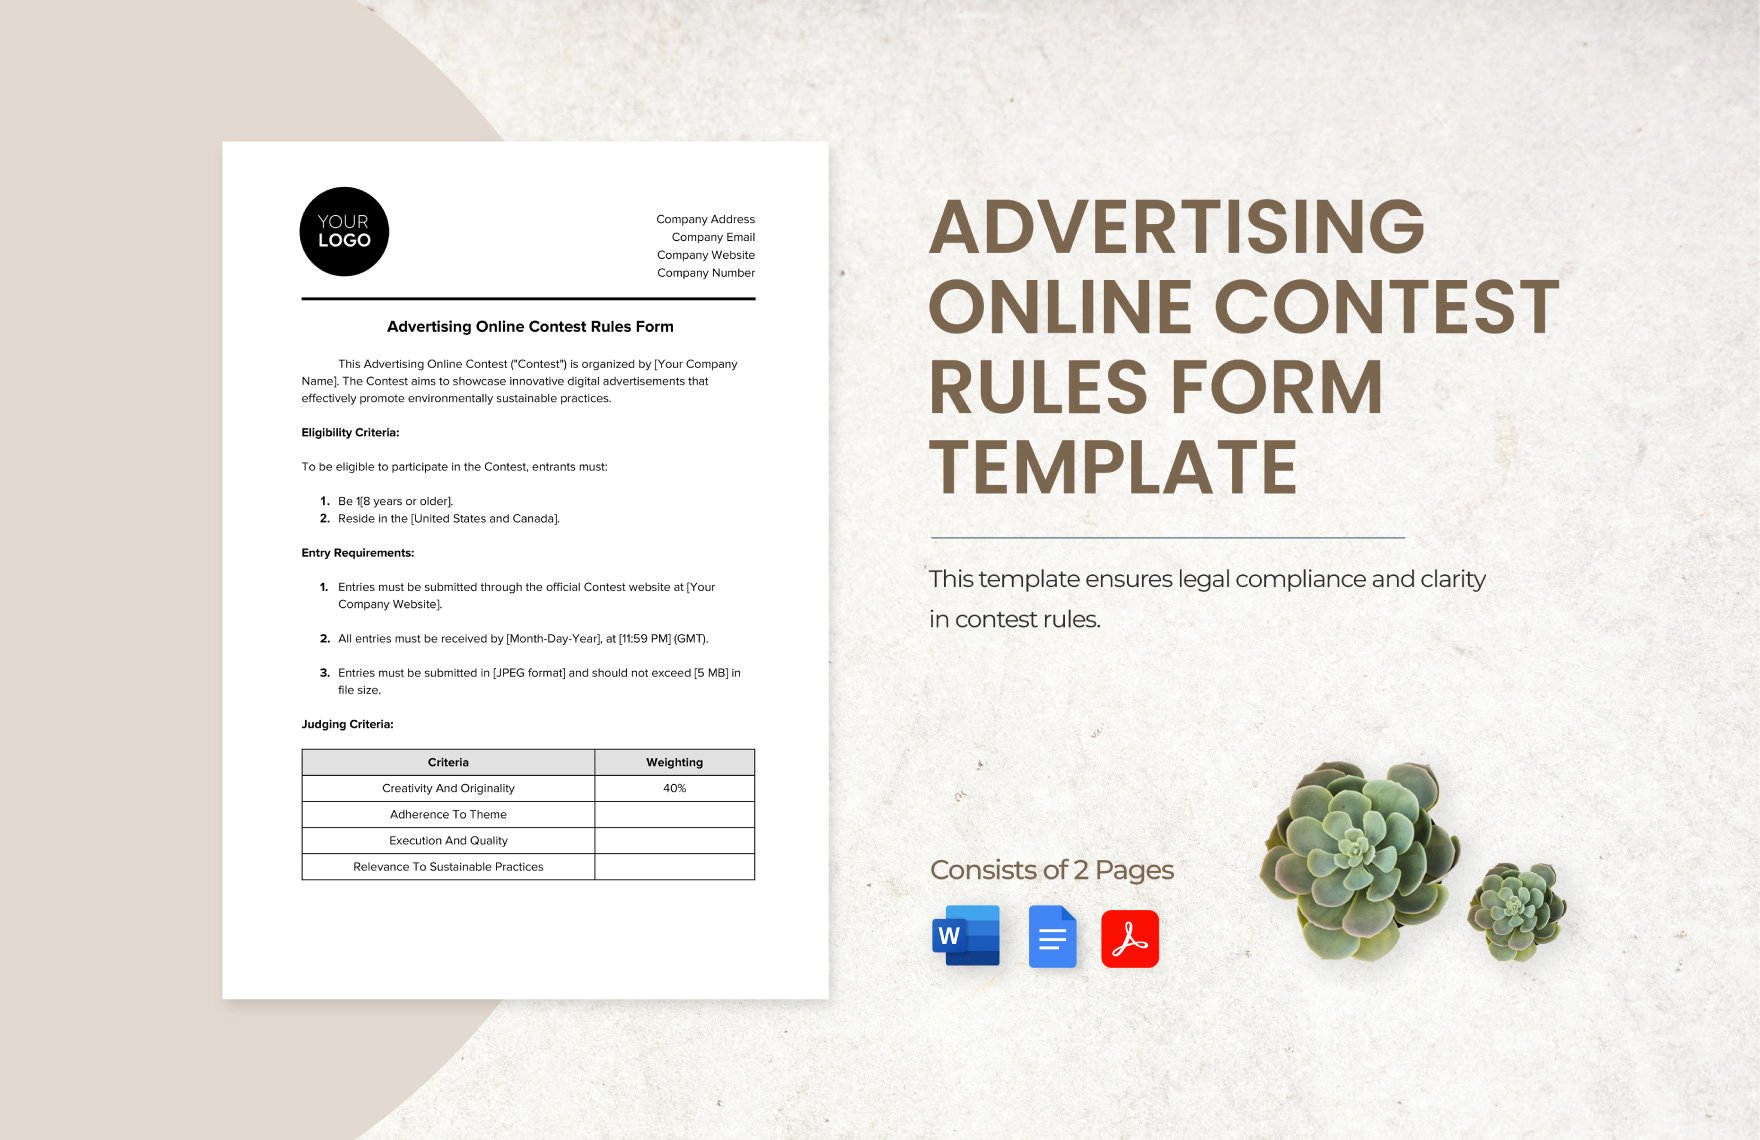 Advertising Online Contest Rules Form Template